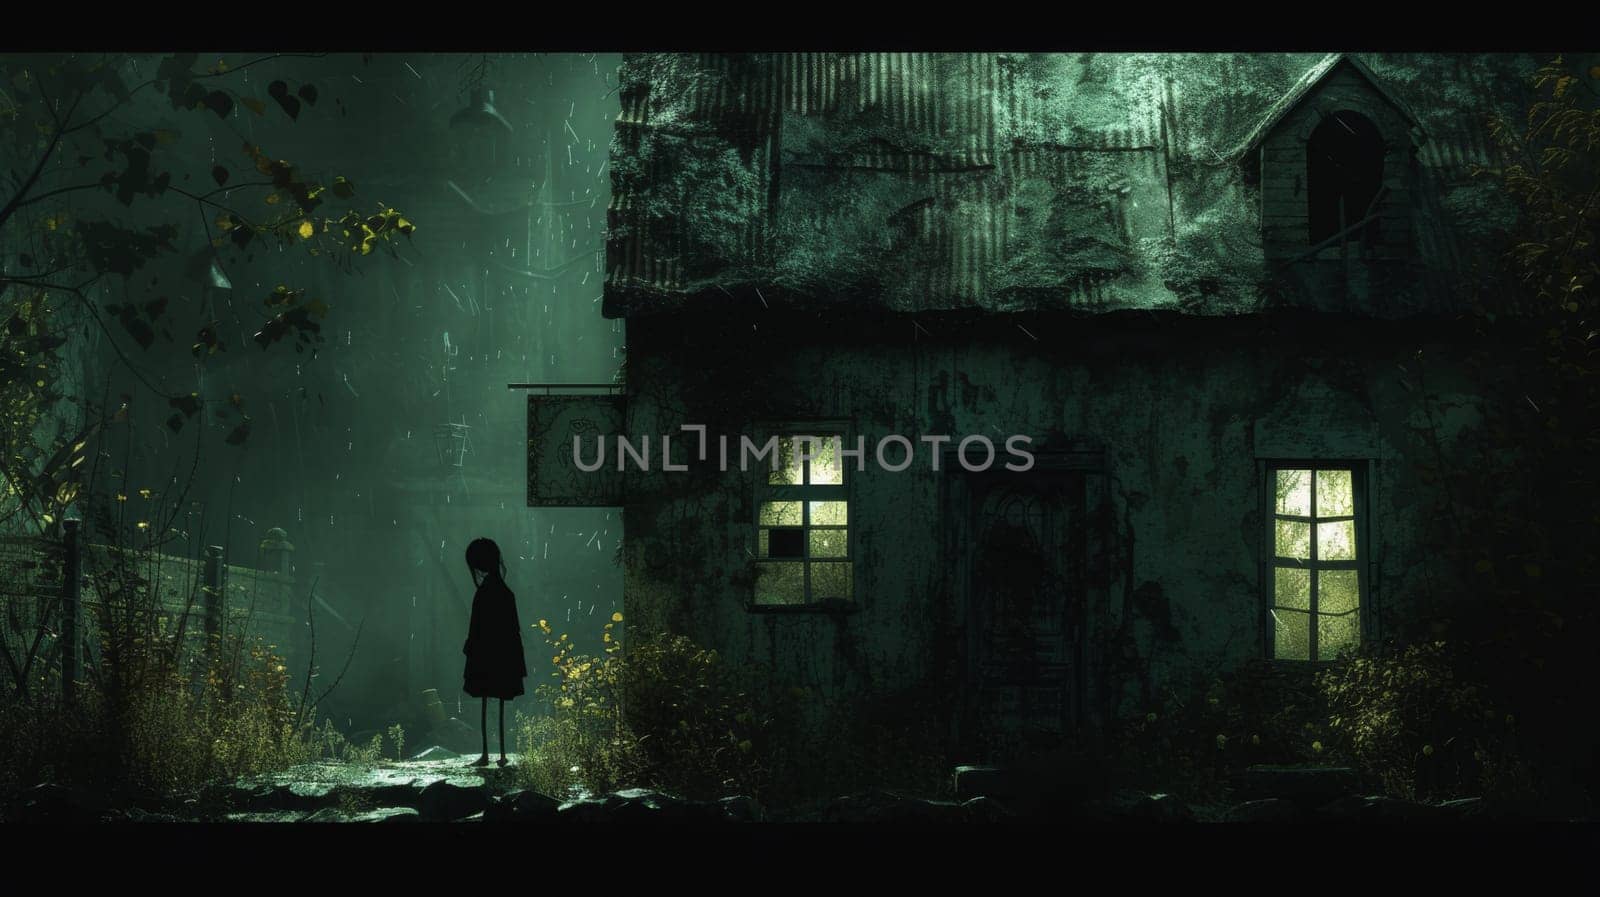 A person standing in front of a house at night